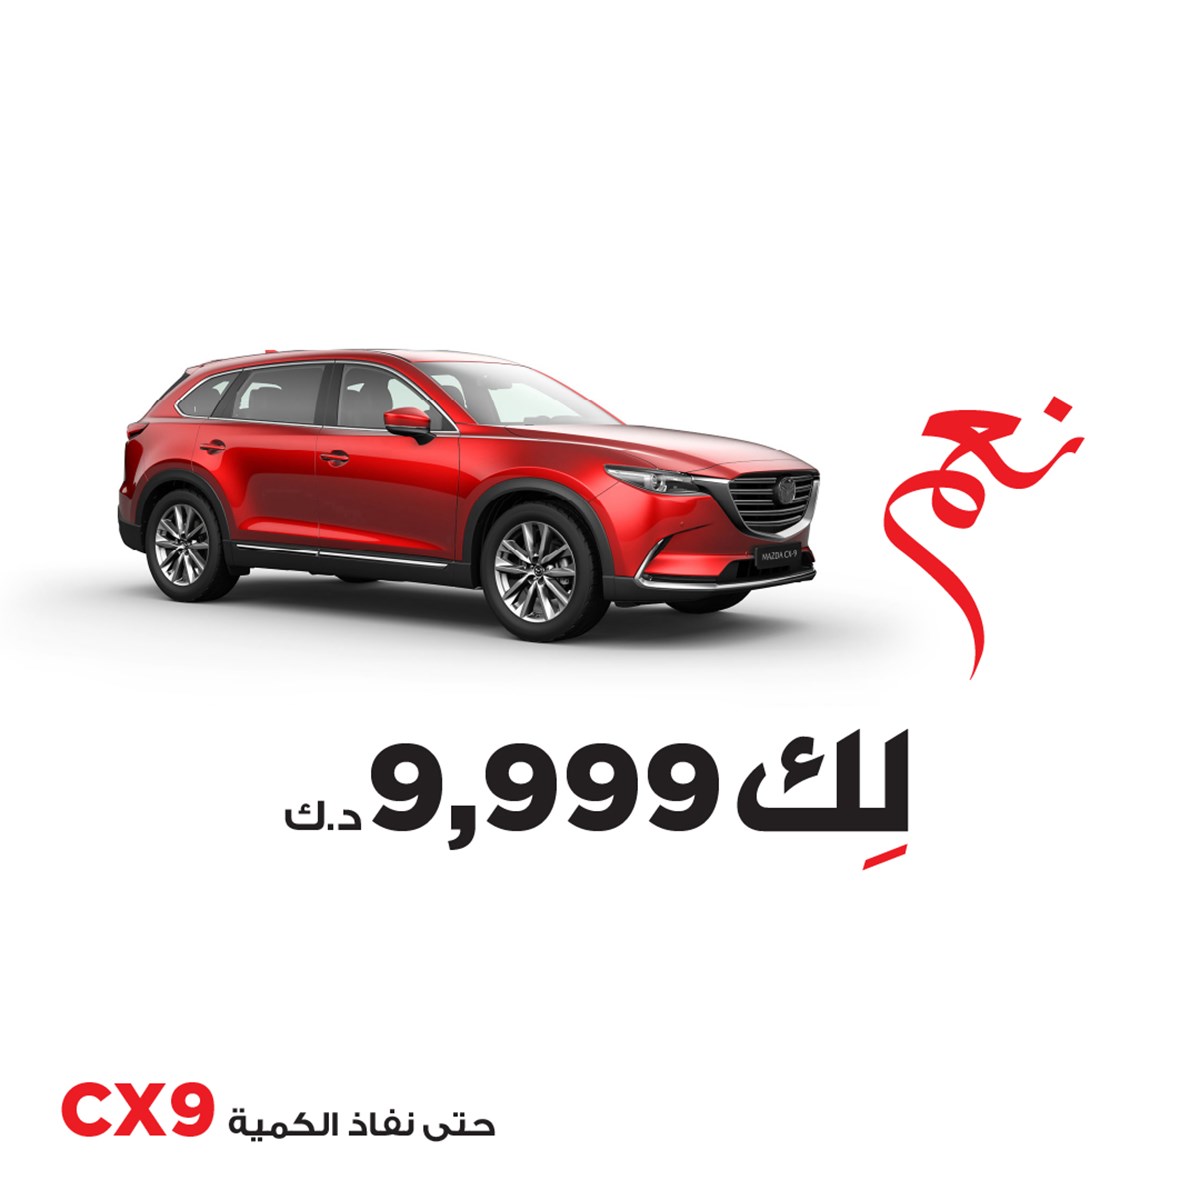 Mazda CX-9 Yes For You KD 9,999